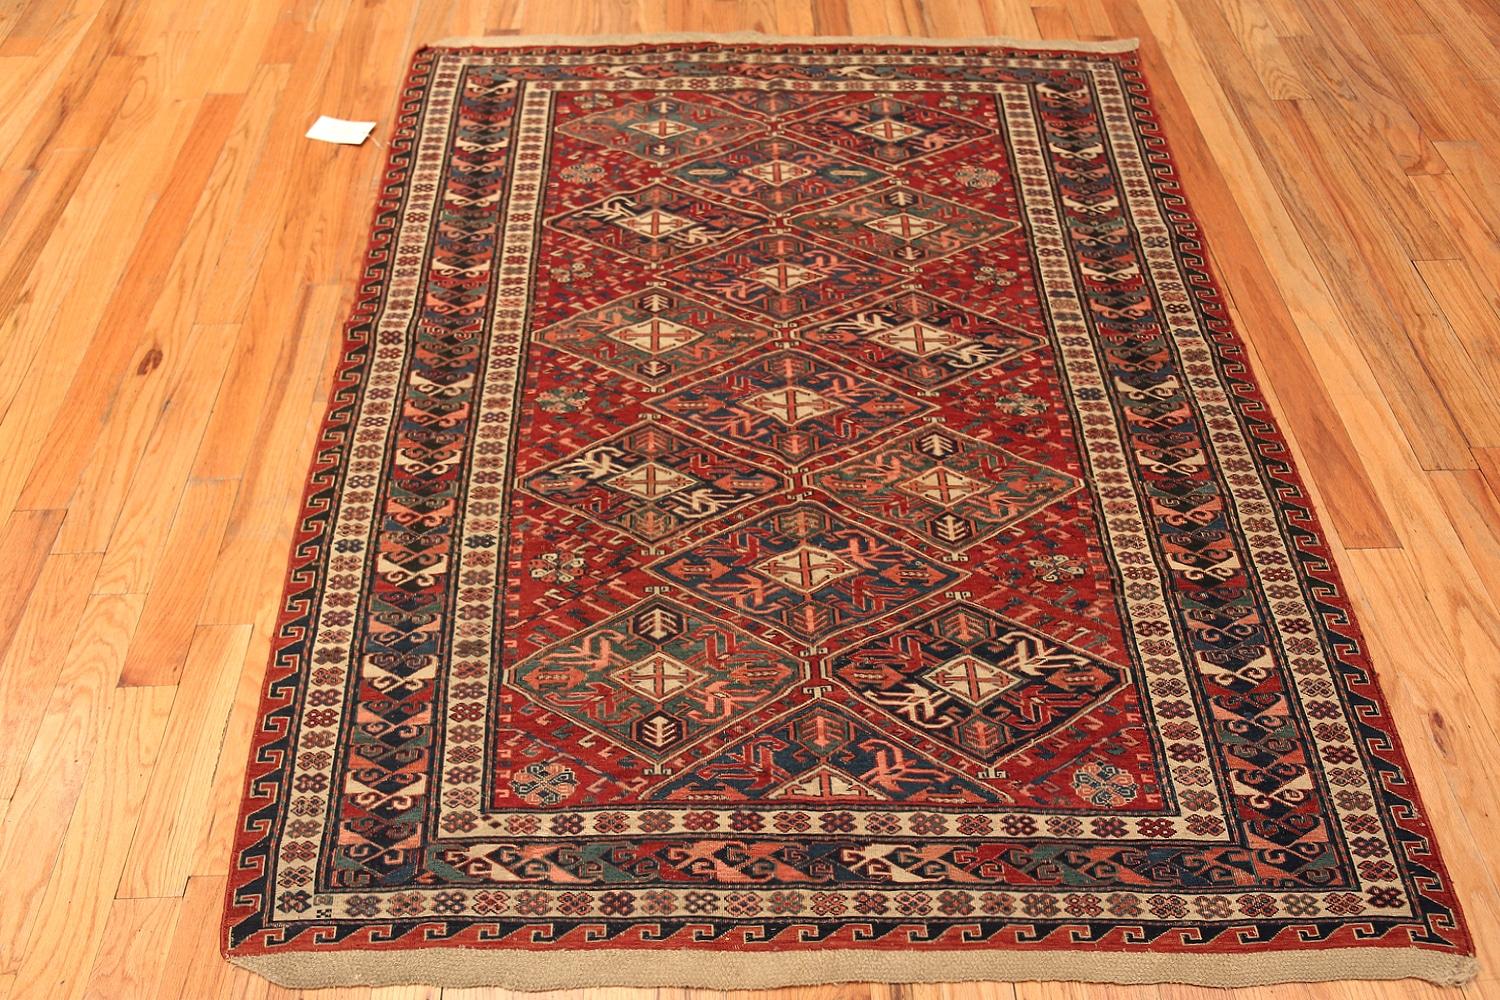 A Beautiful Smaller Size Gorgeously Rustic and Tribal Antique Flat Woven Caucasian Soumak Rug, Country of Origin: Caucasus, Circa Date: 1900 – Without a doubt, the antique Caucasian Soumak rugs are some of the most beautiful area rugs in the world.